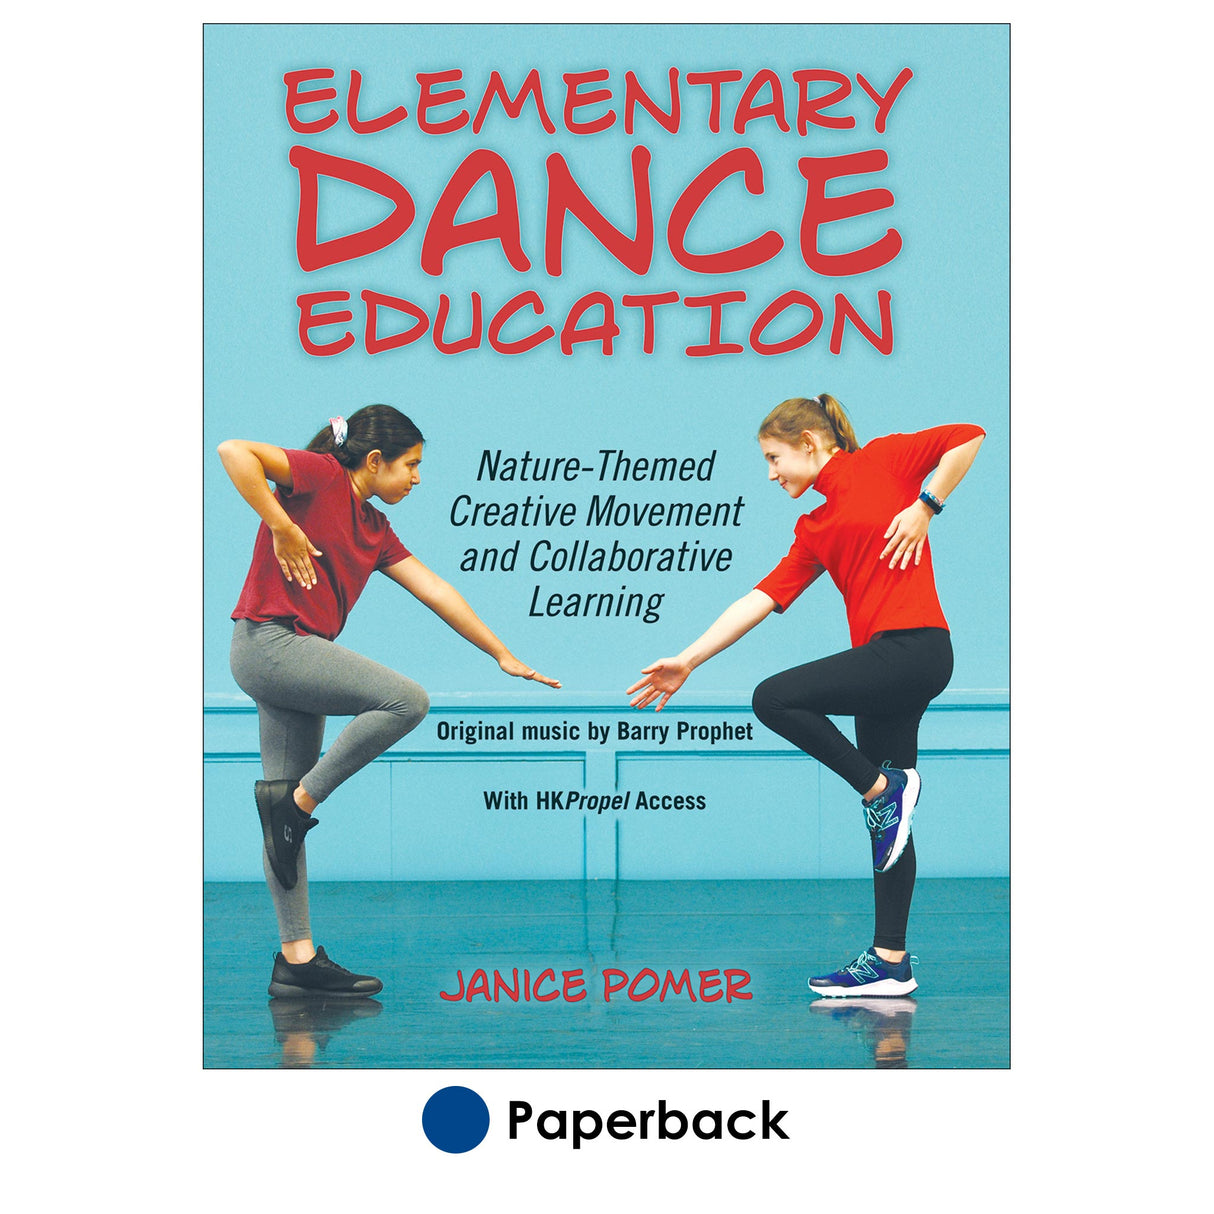 Elementary Dance Education With HKPropel Access